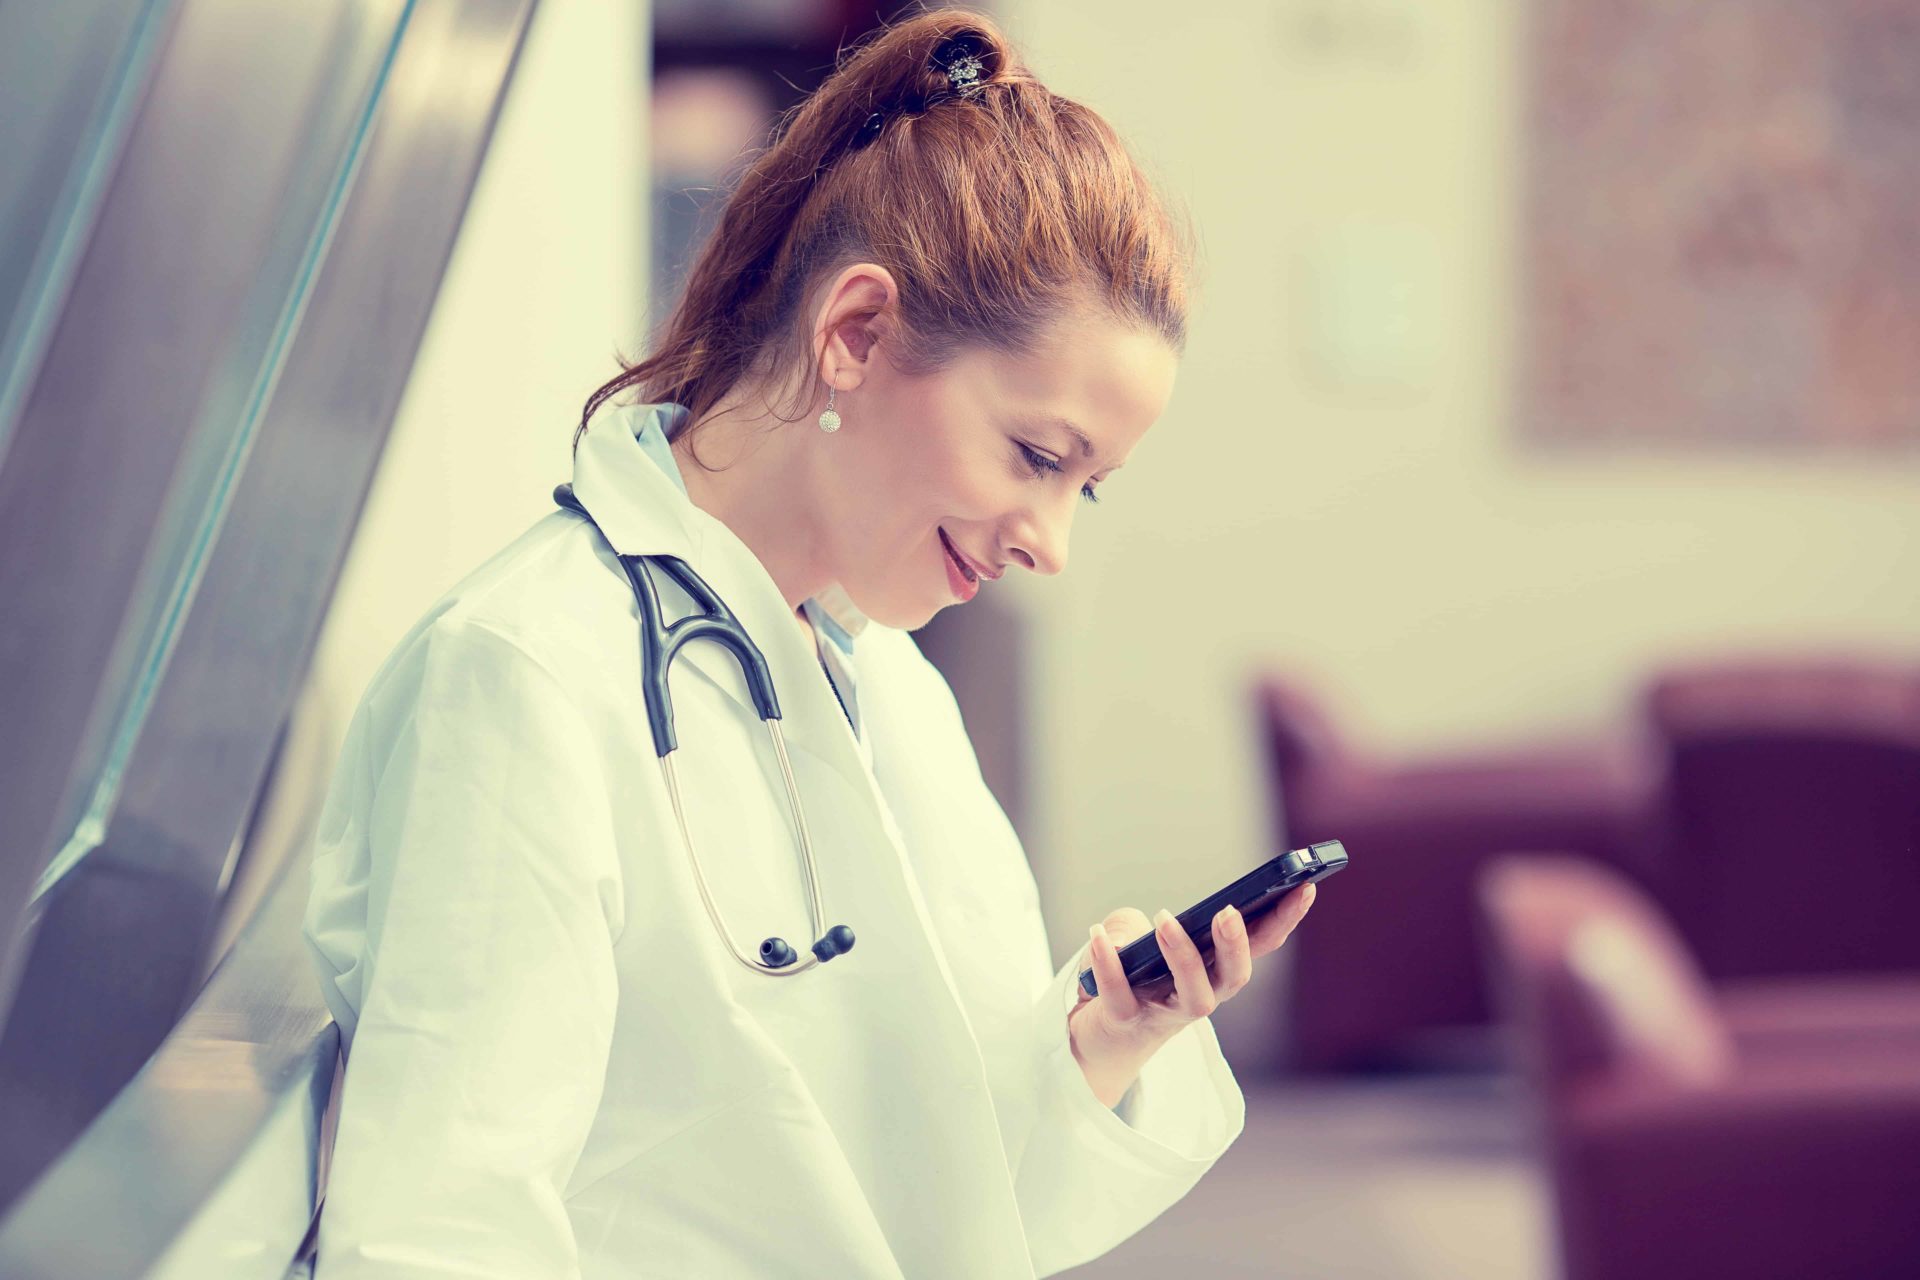 Personalized mobile app experience for a large healthcare system